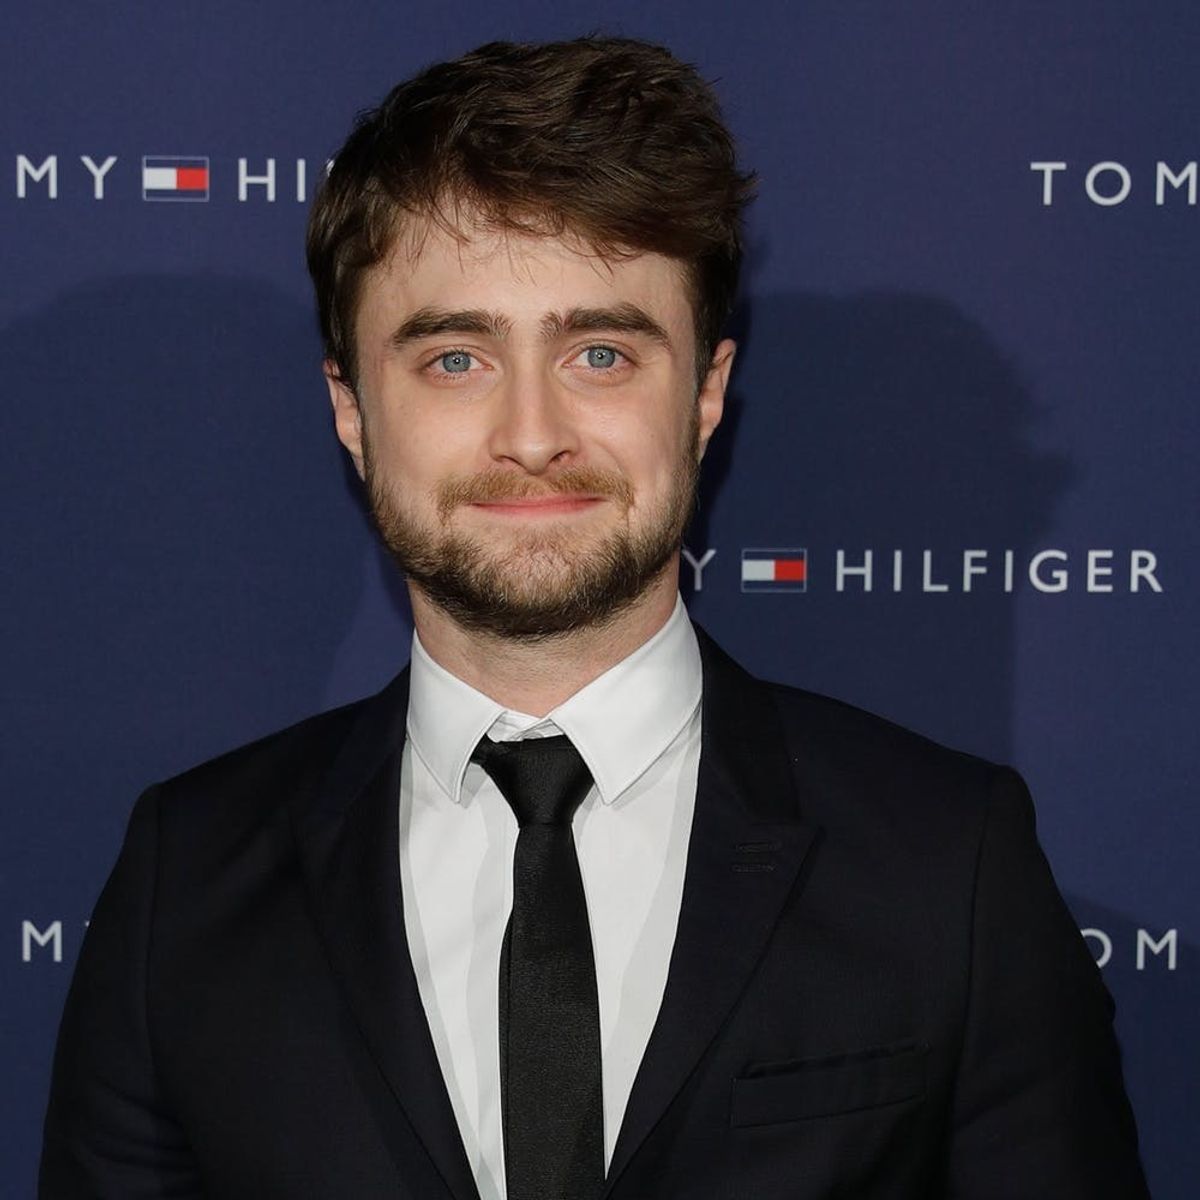 Daniel Radcliffe Weighs in on the Johnny Depp ‘Fantastic Beasts’ Controversy